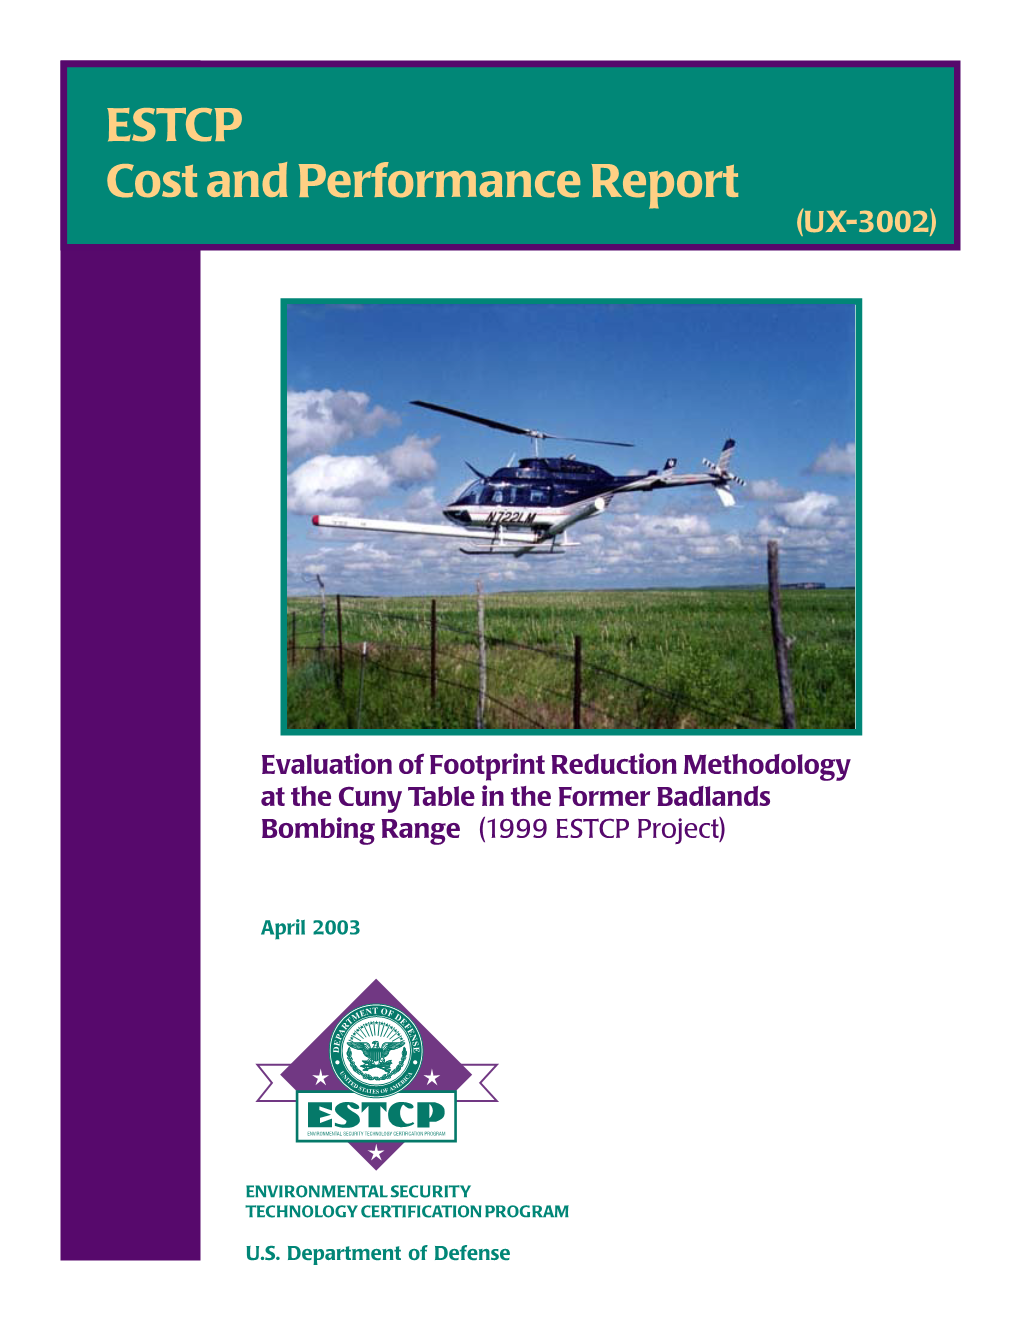 ESTCP Cost and Performance Report (UX-3002)